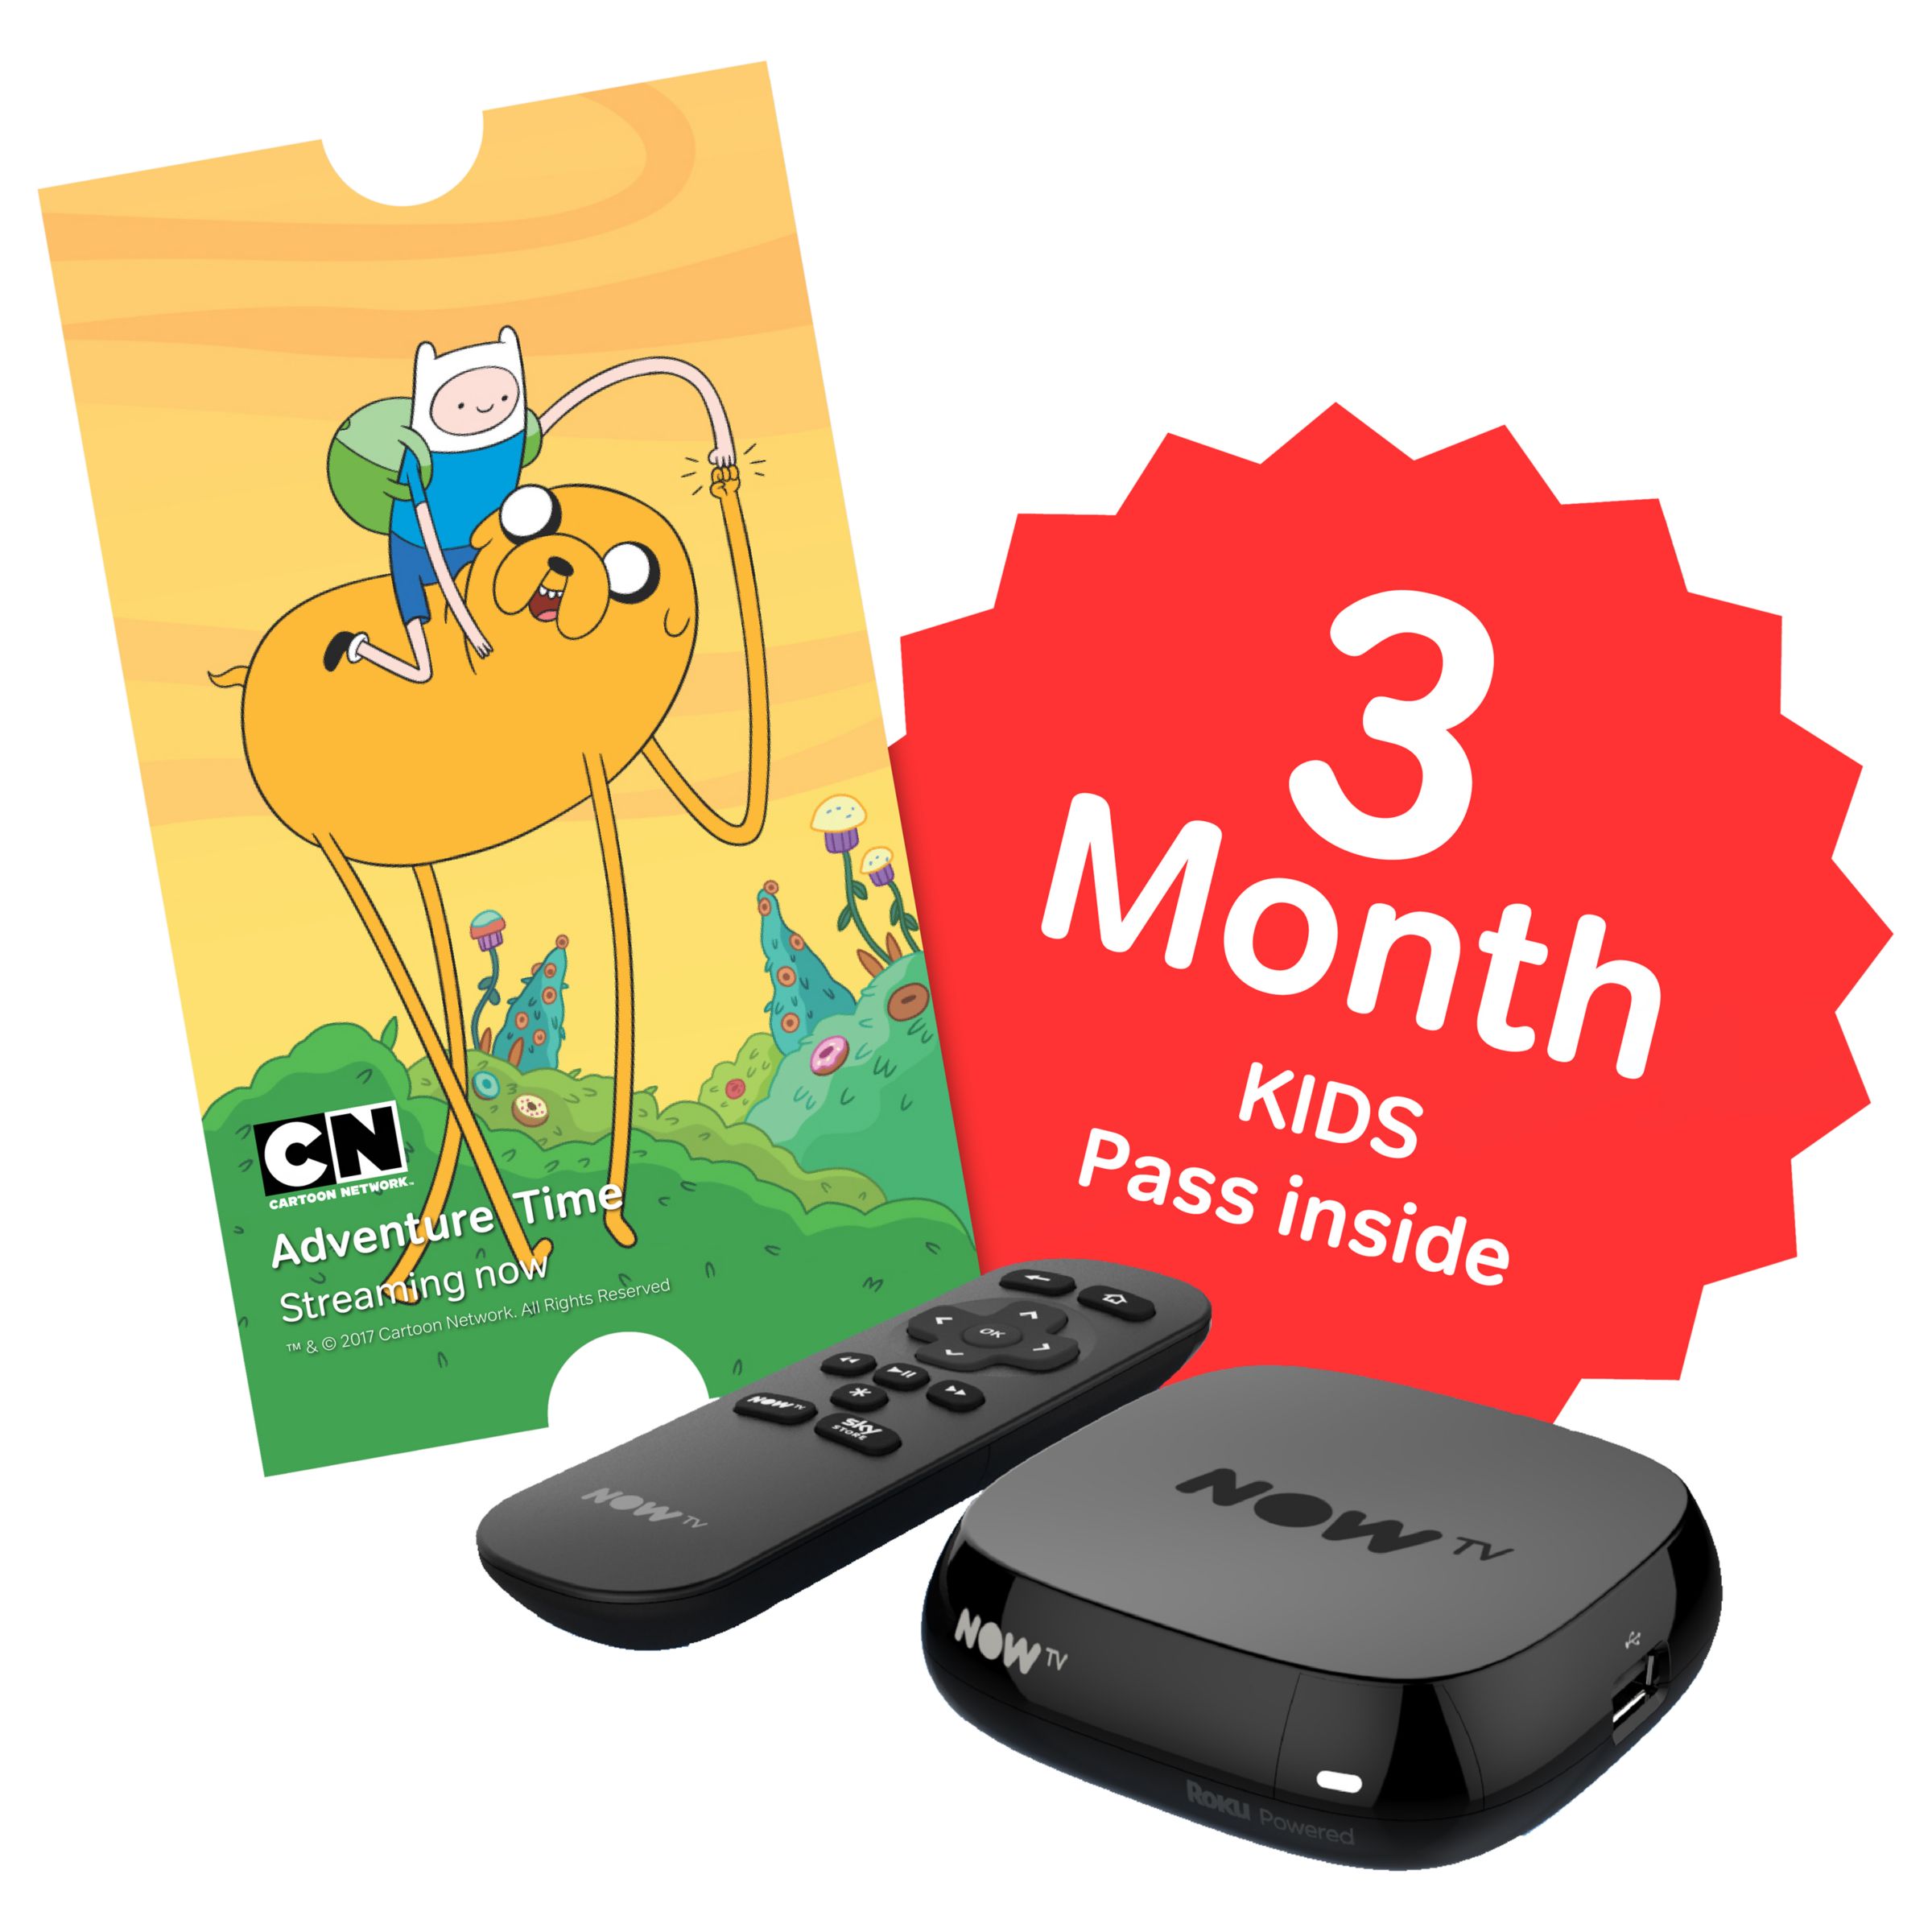 NOW TV Box with 3 Month Kids Pass, Black